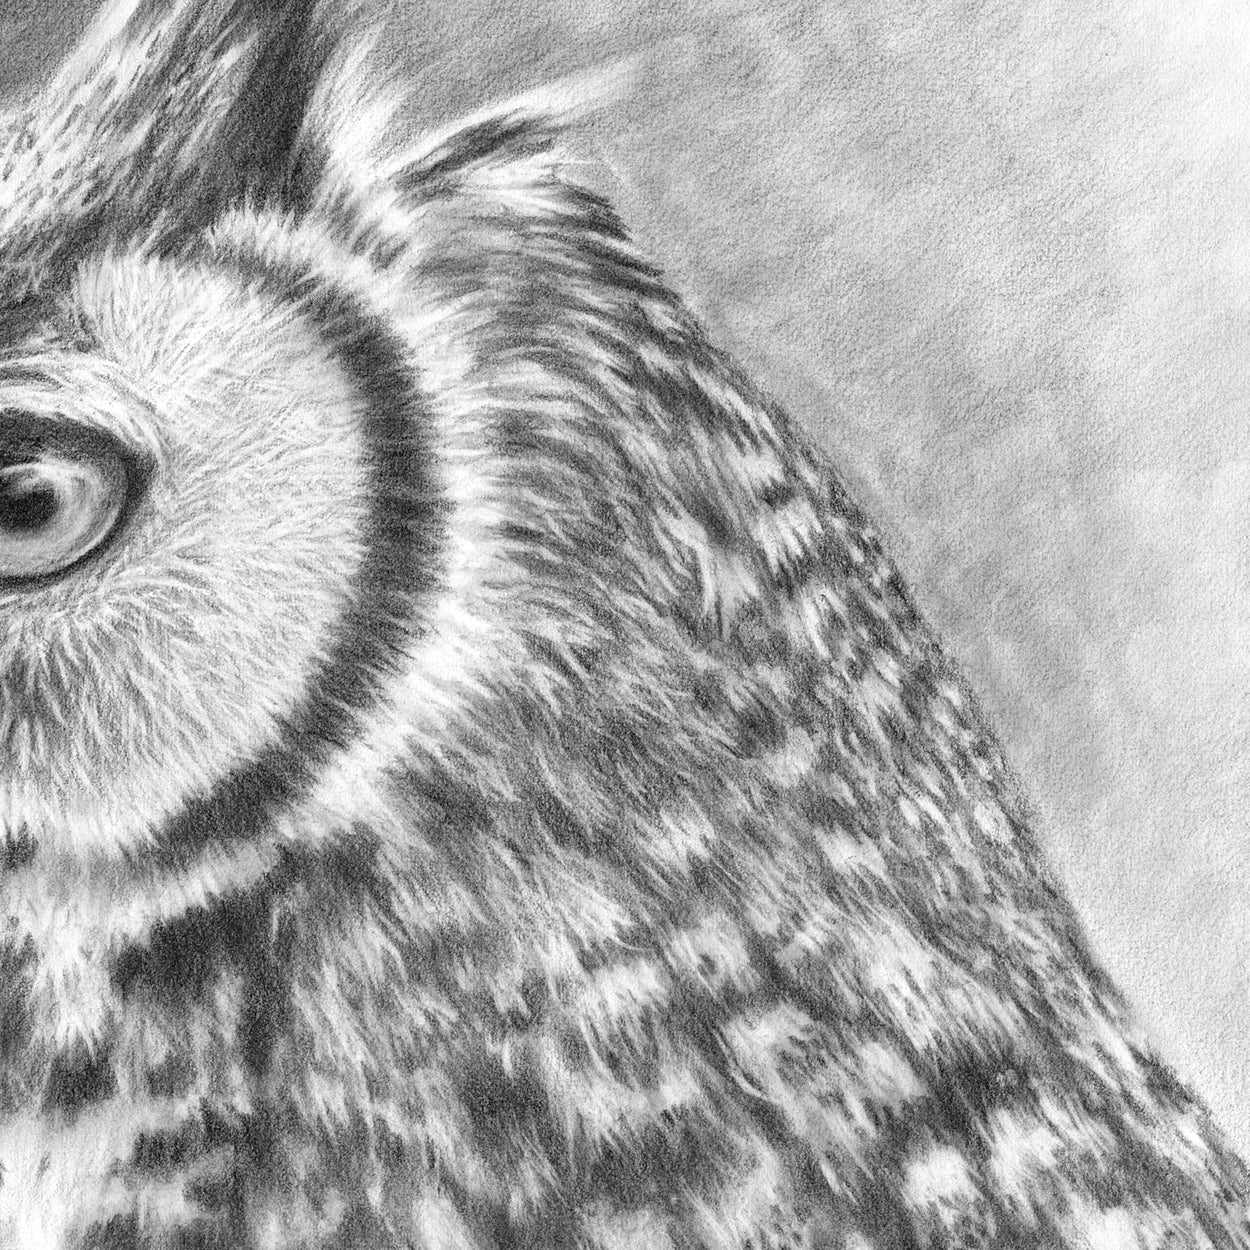 Close-up of a drawing of the head of a great horned owl